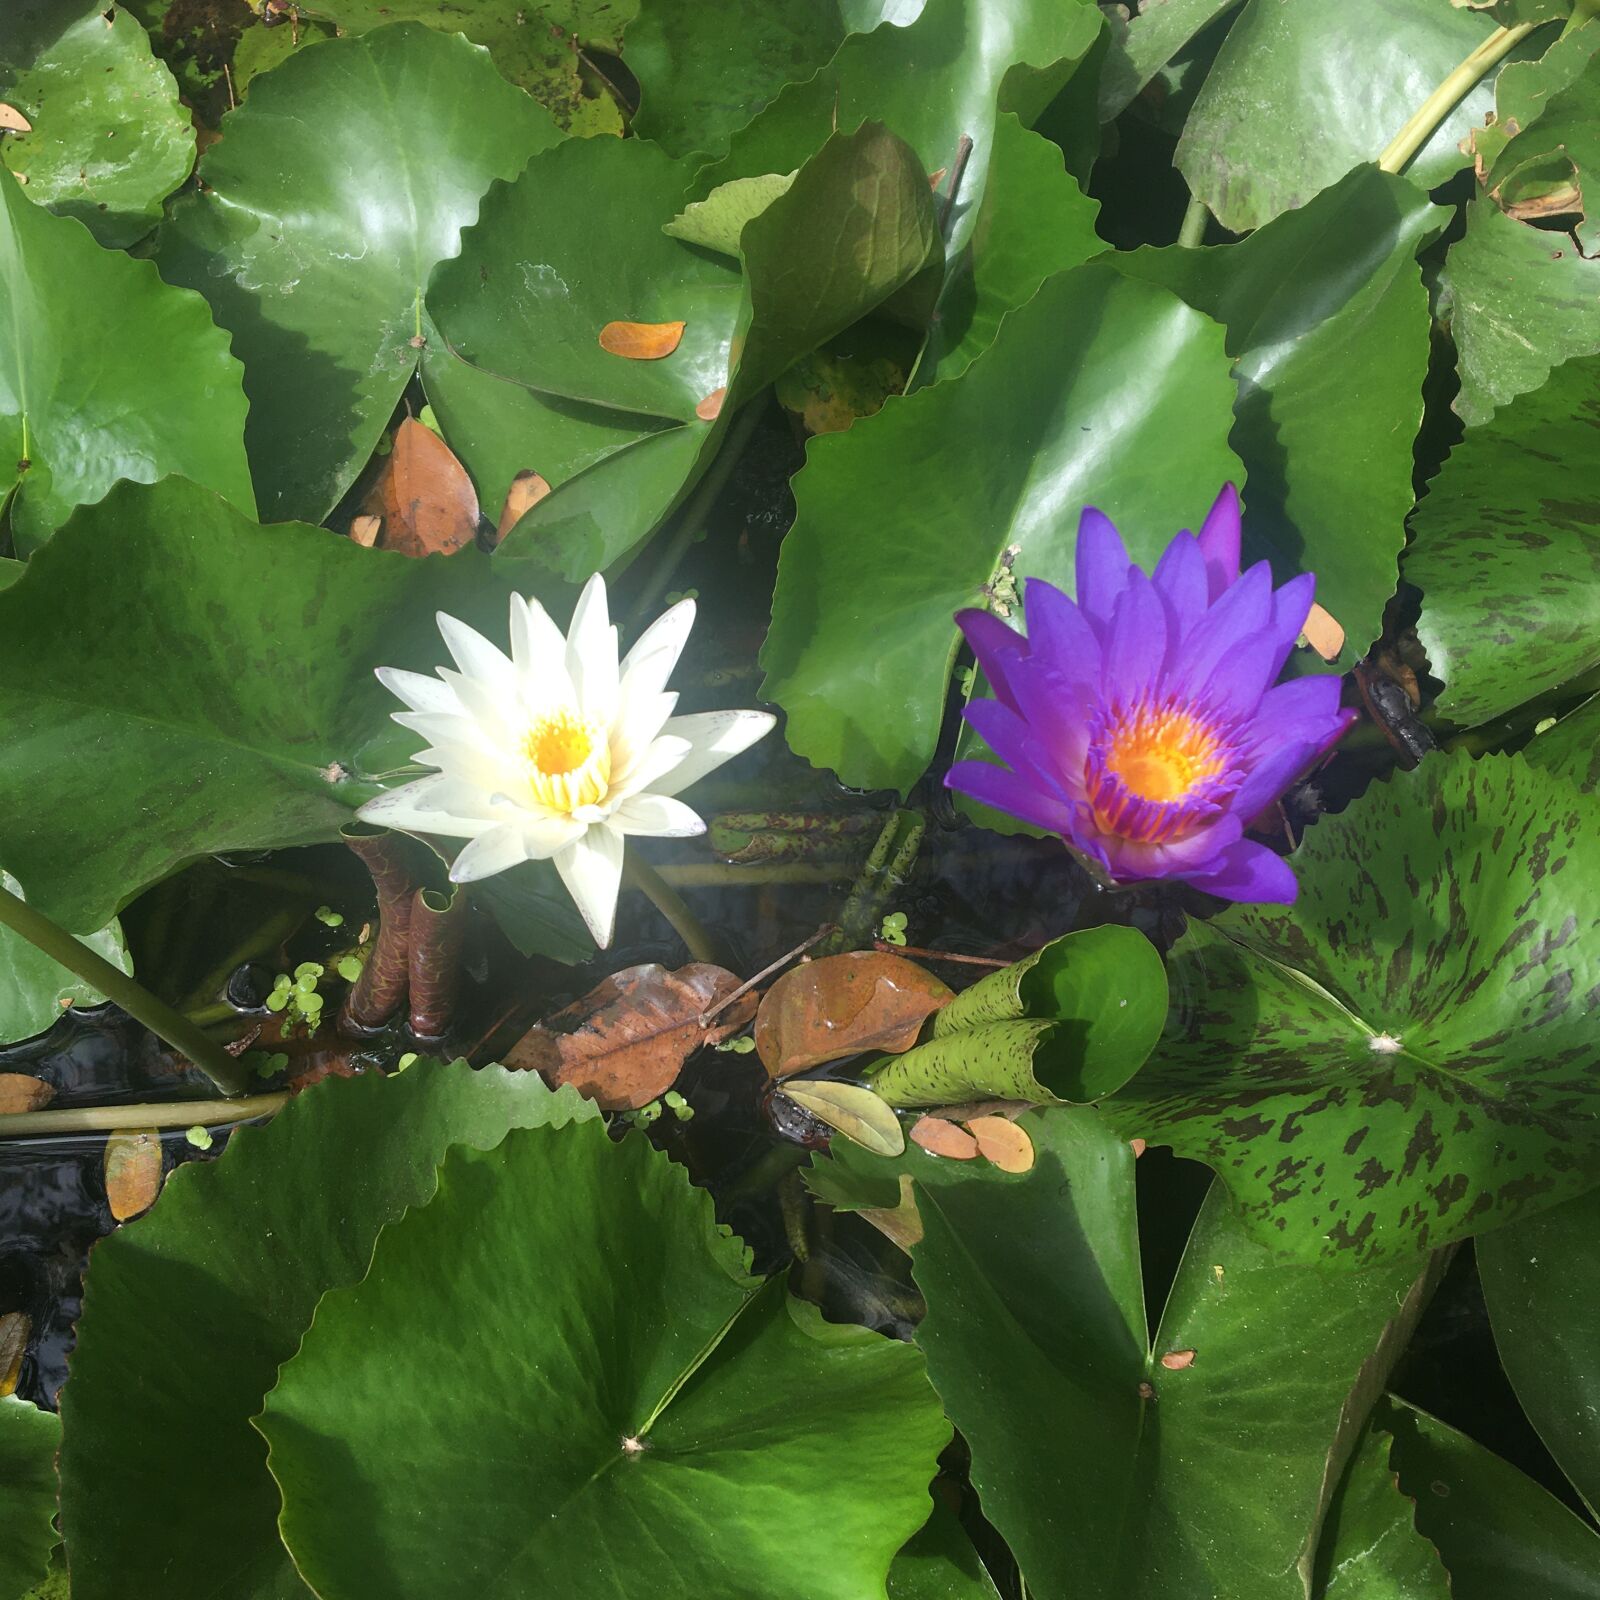 Apple iPhone 6s sample photo. Water lilies, nature, meditation photography